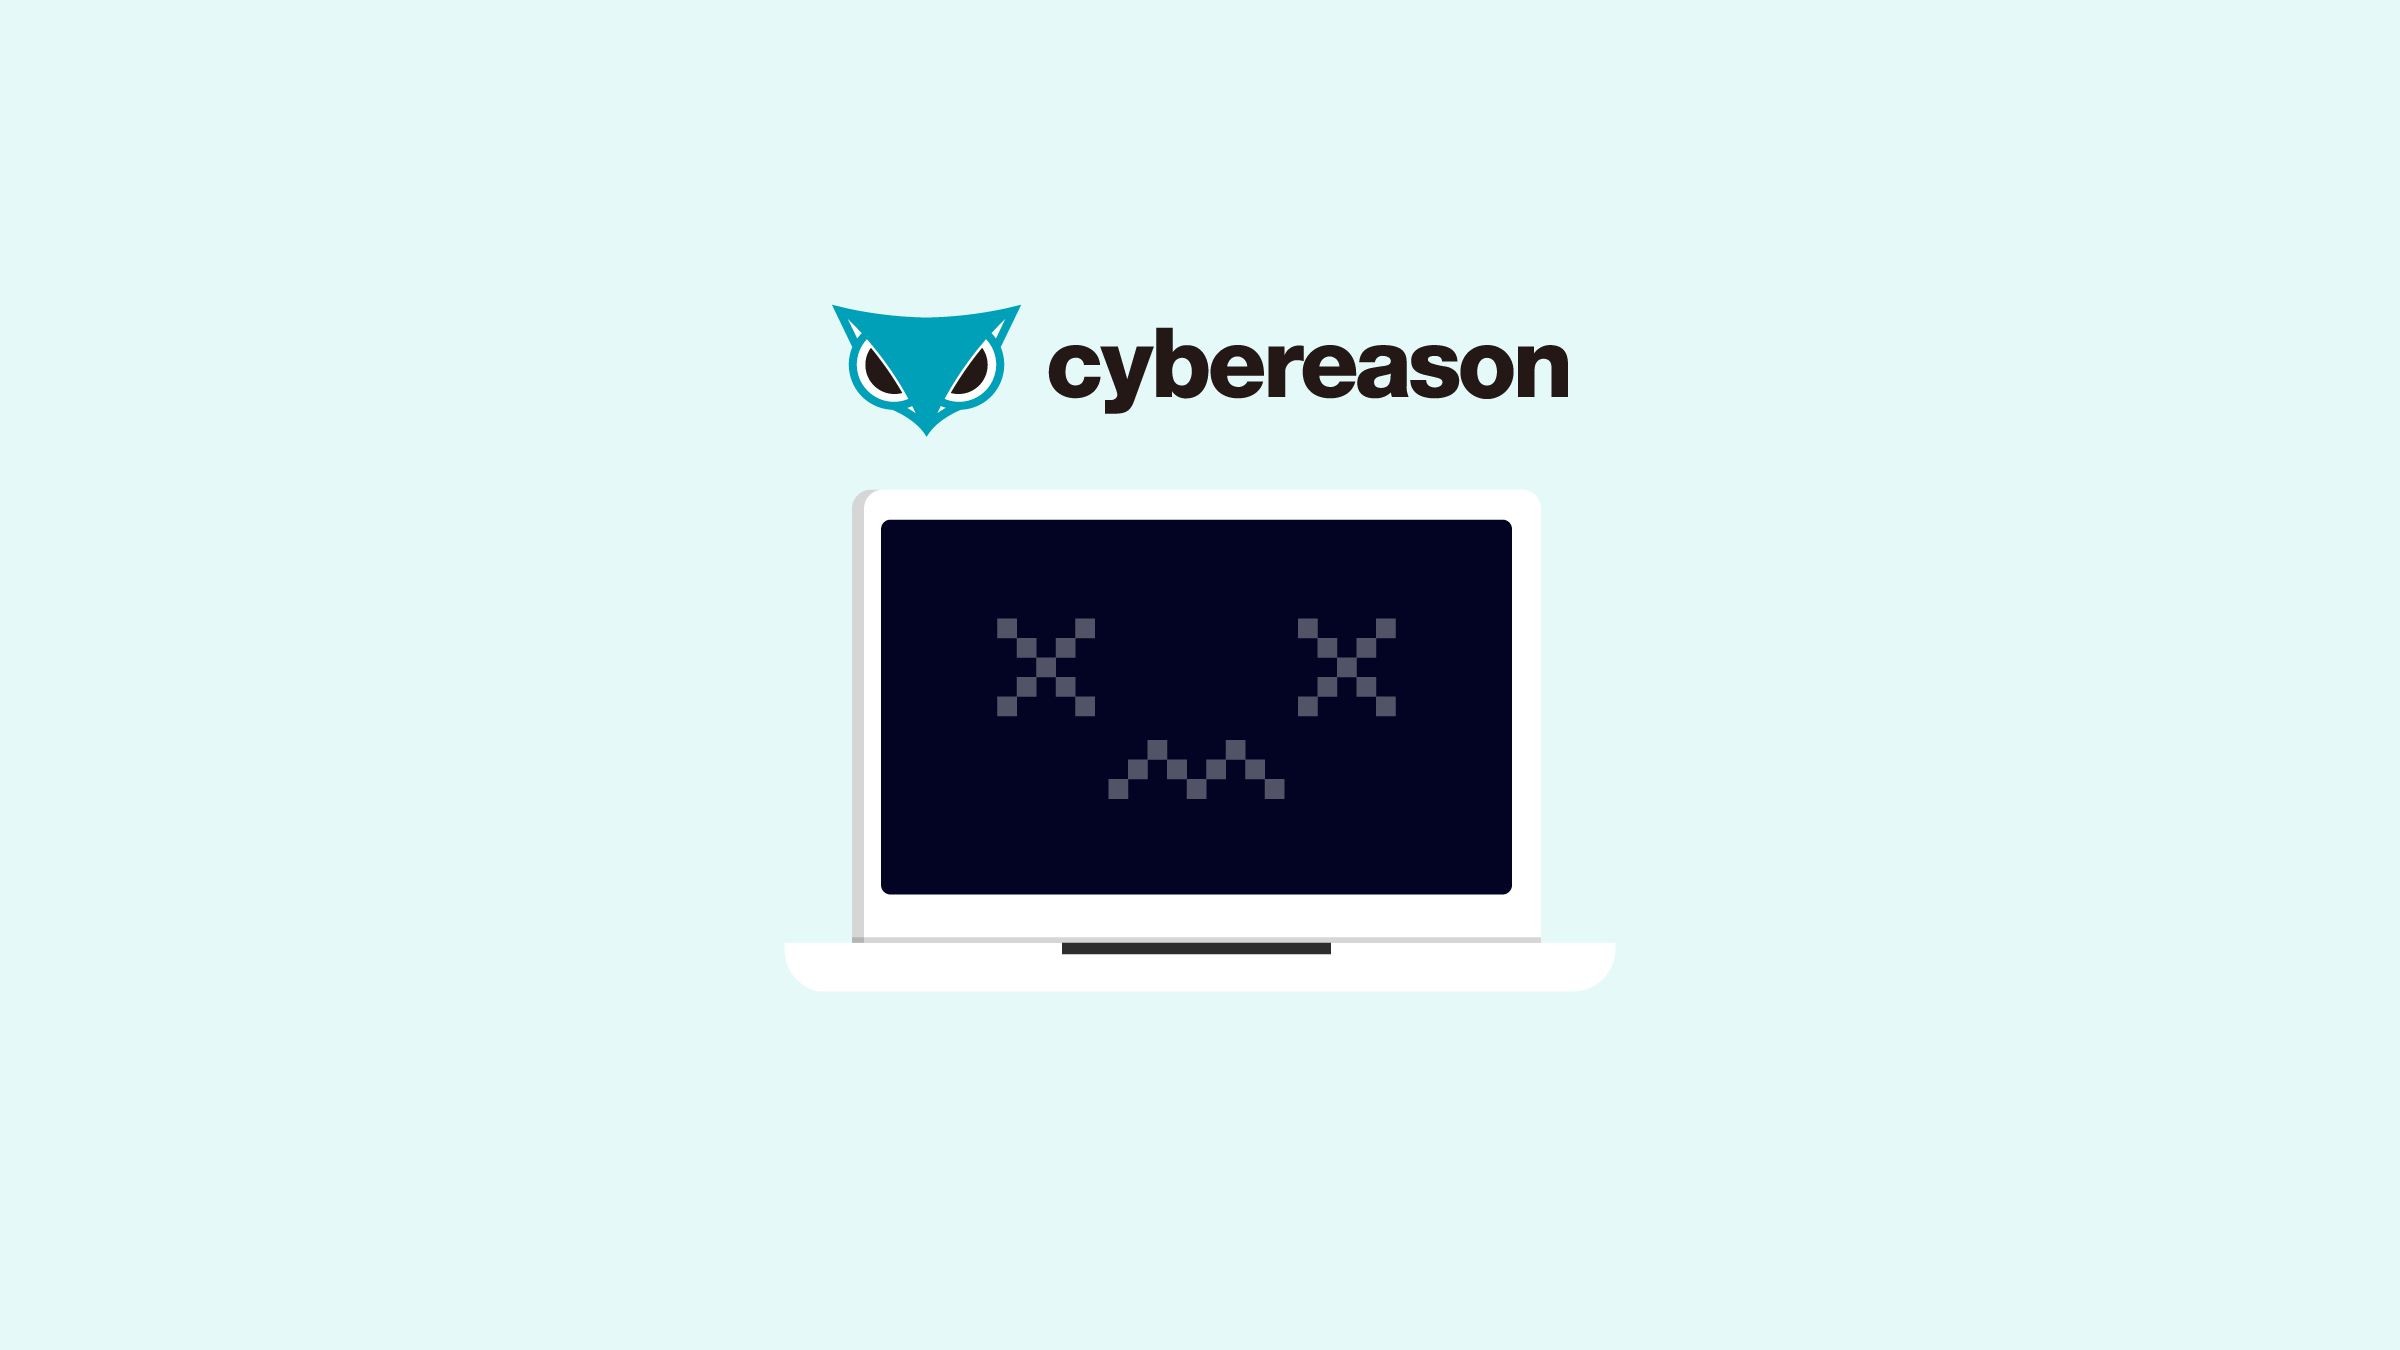 Impact of Cybereason security software